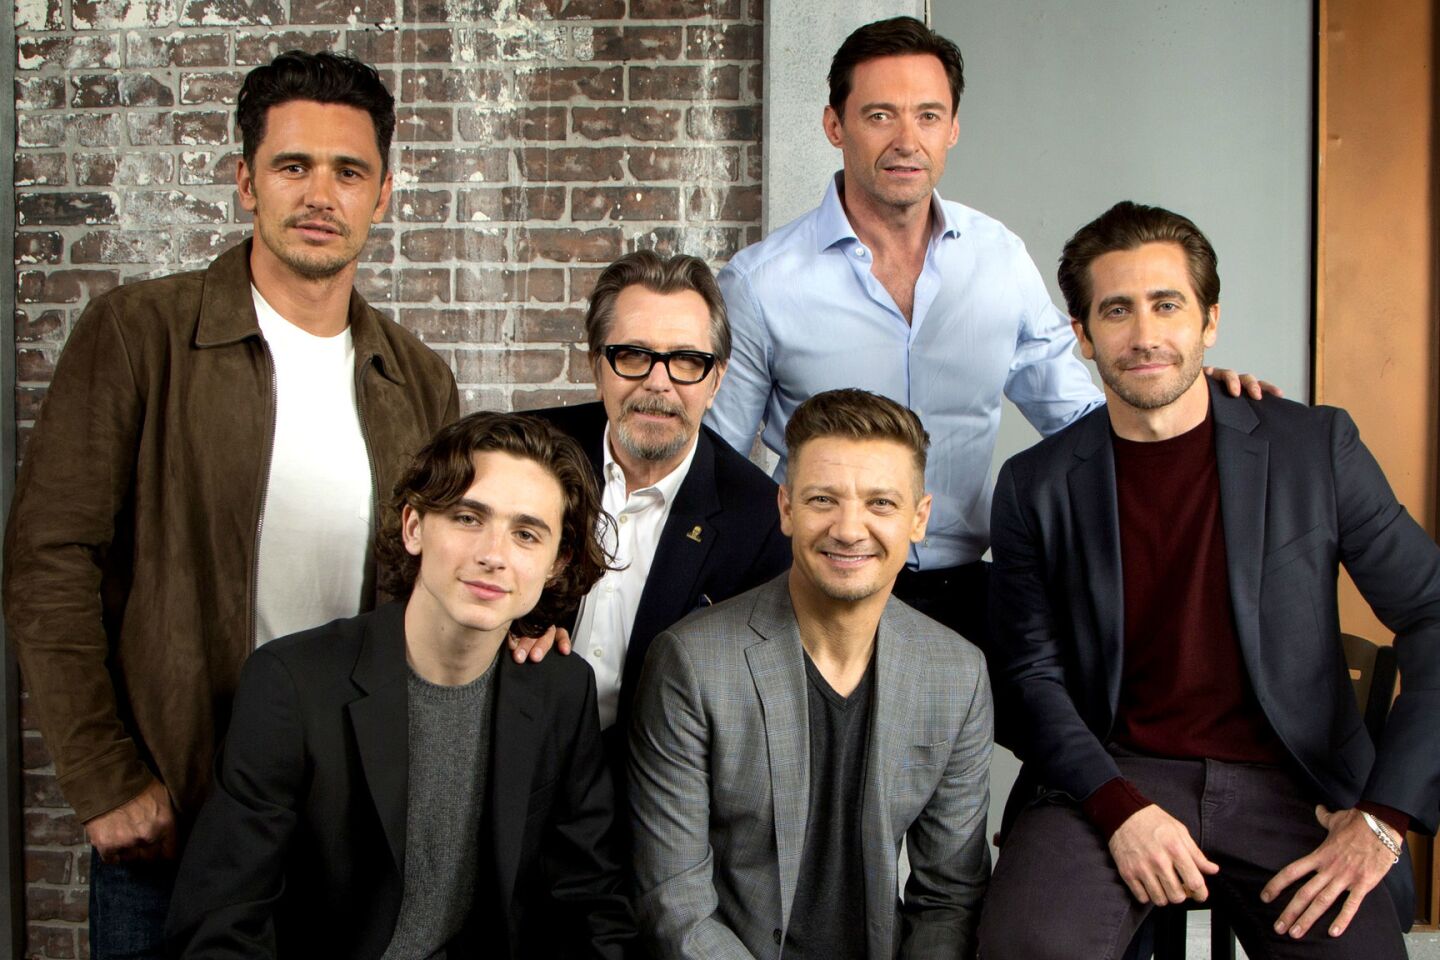 Lead actor roundtable